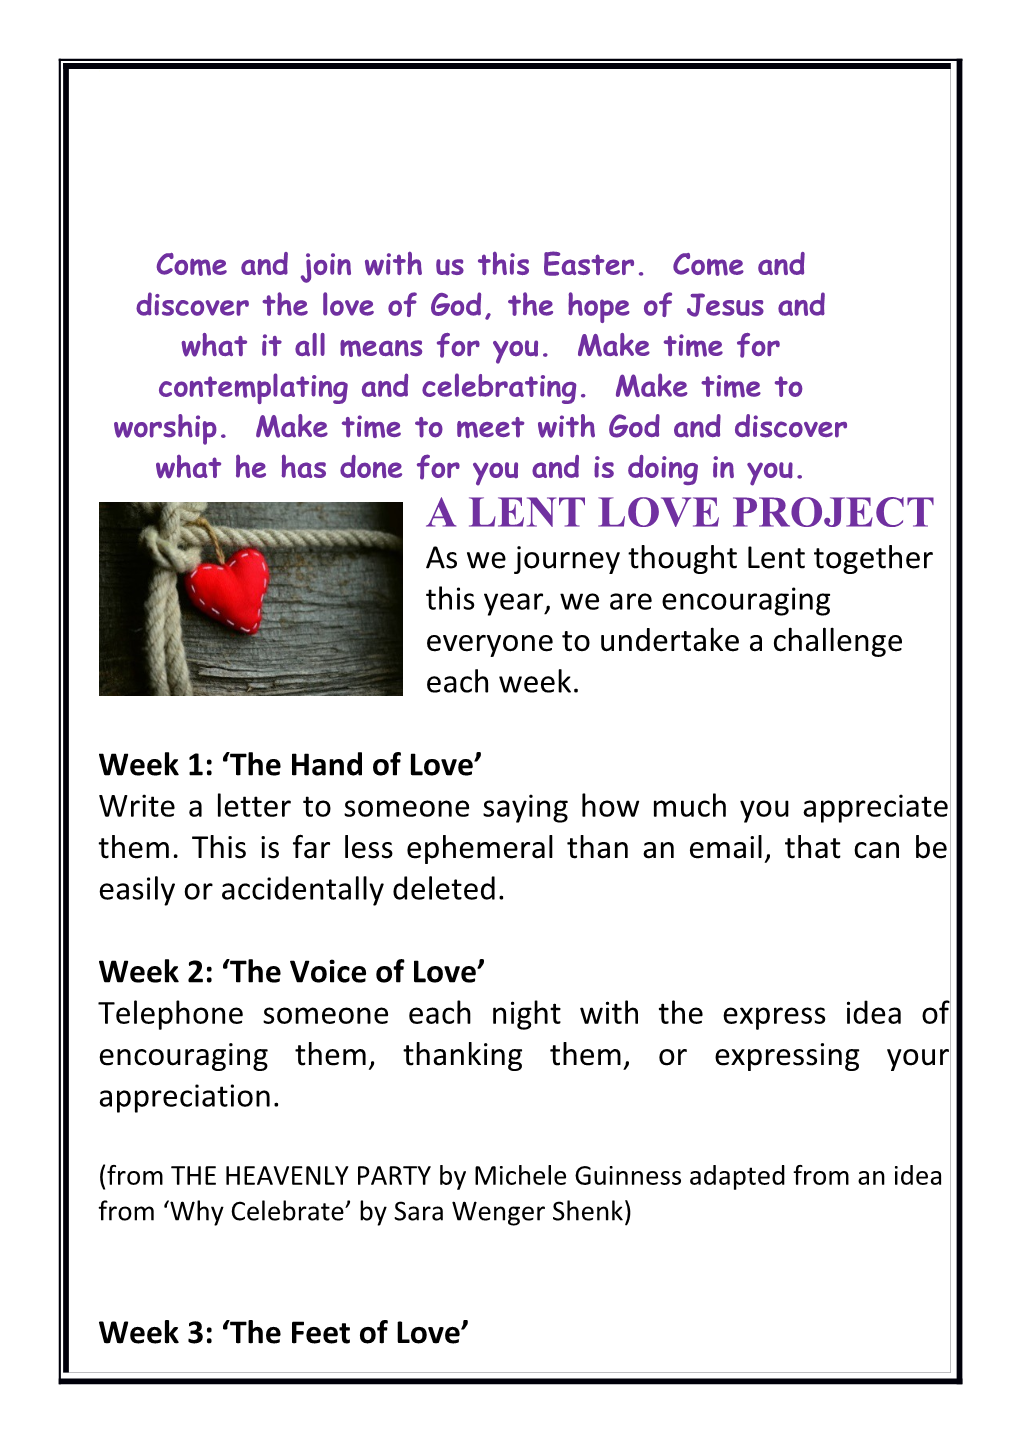 Come and Join with Us This Easter. Come and Discover the Love of God, the Hope of Jesus